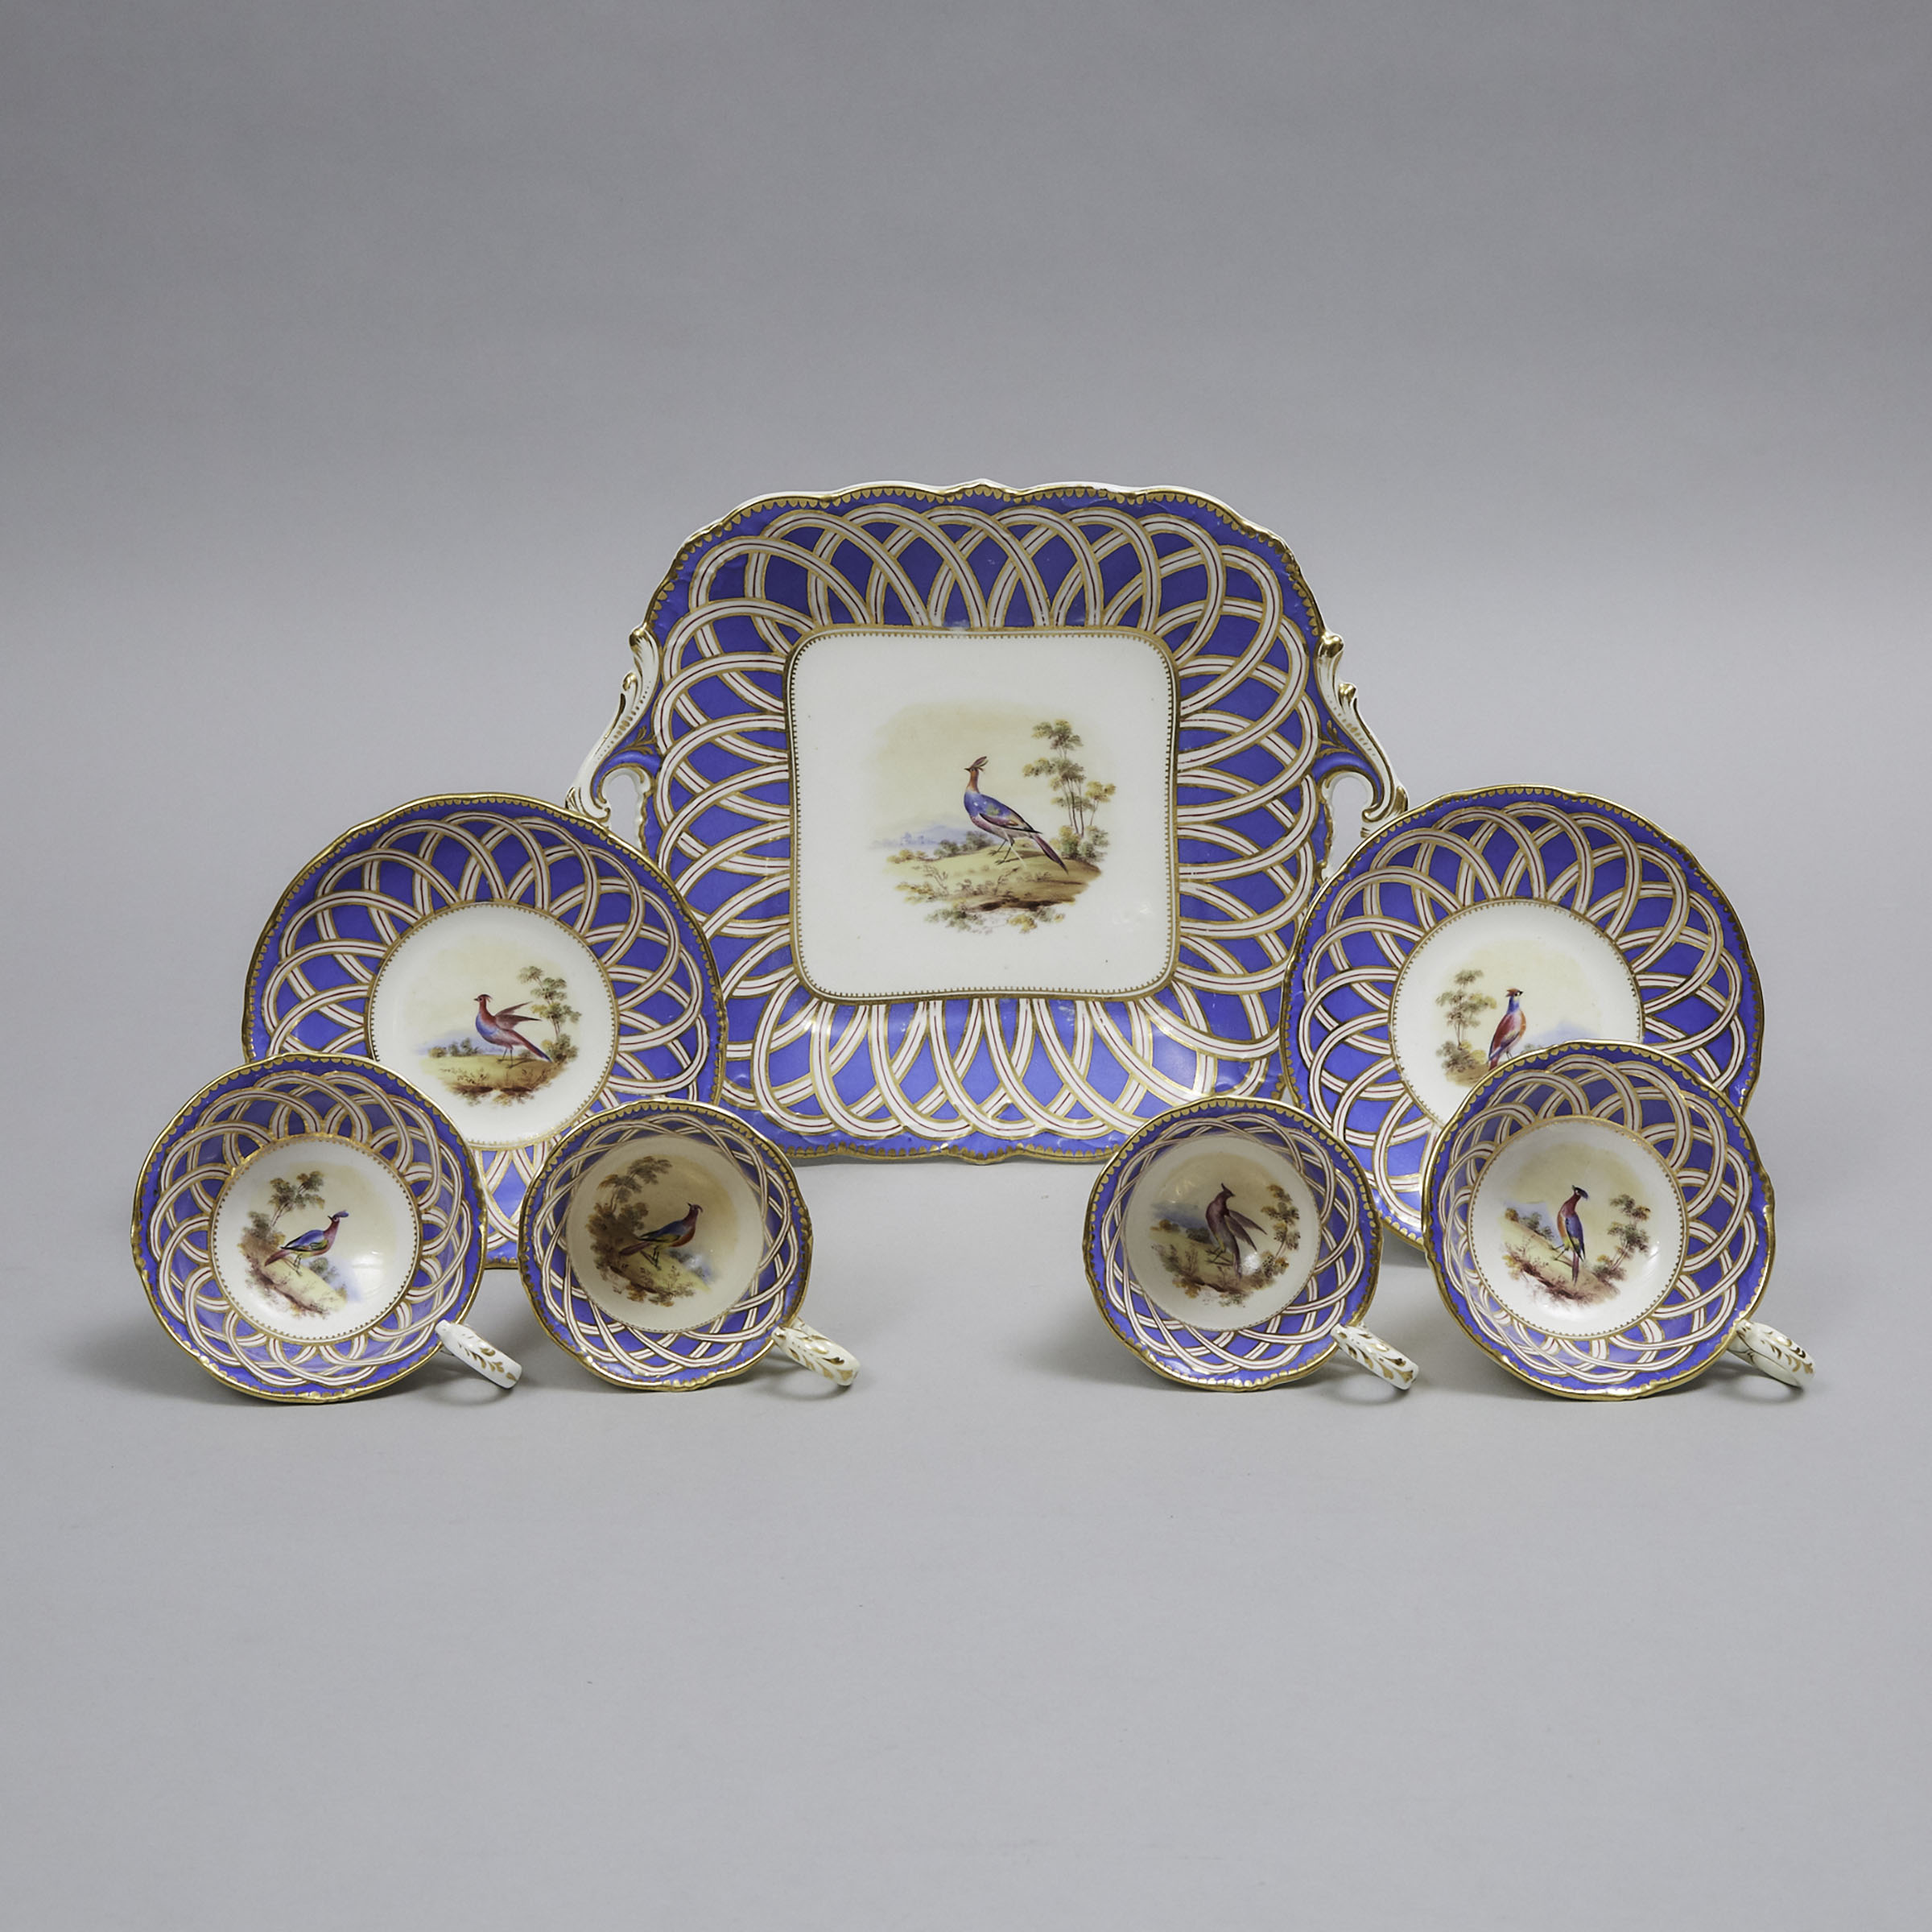 Samuel Alcock Cake Plate and Two Trios, c.1830